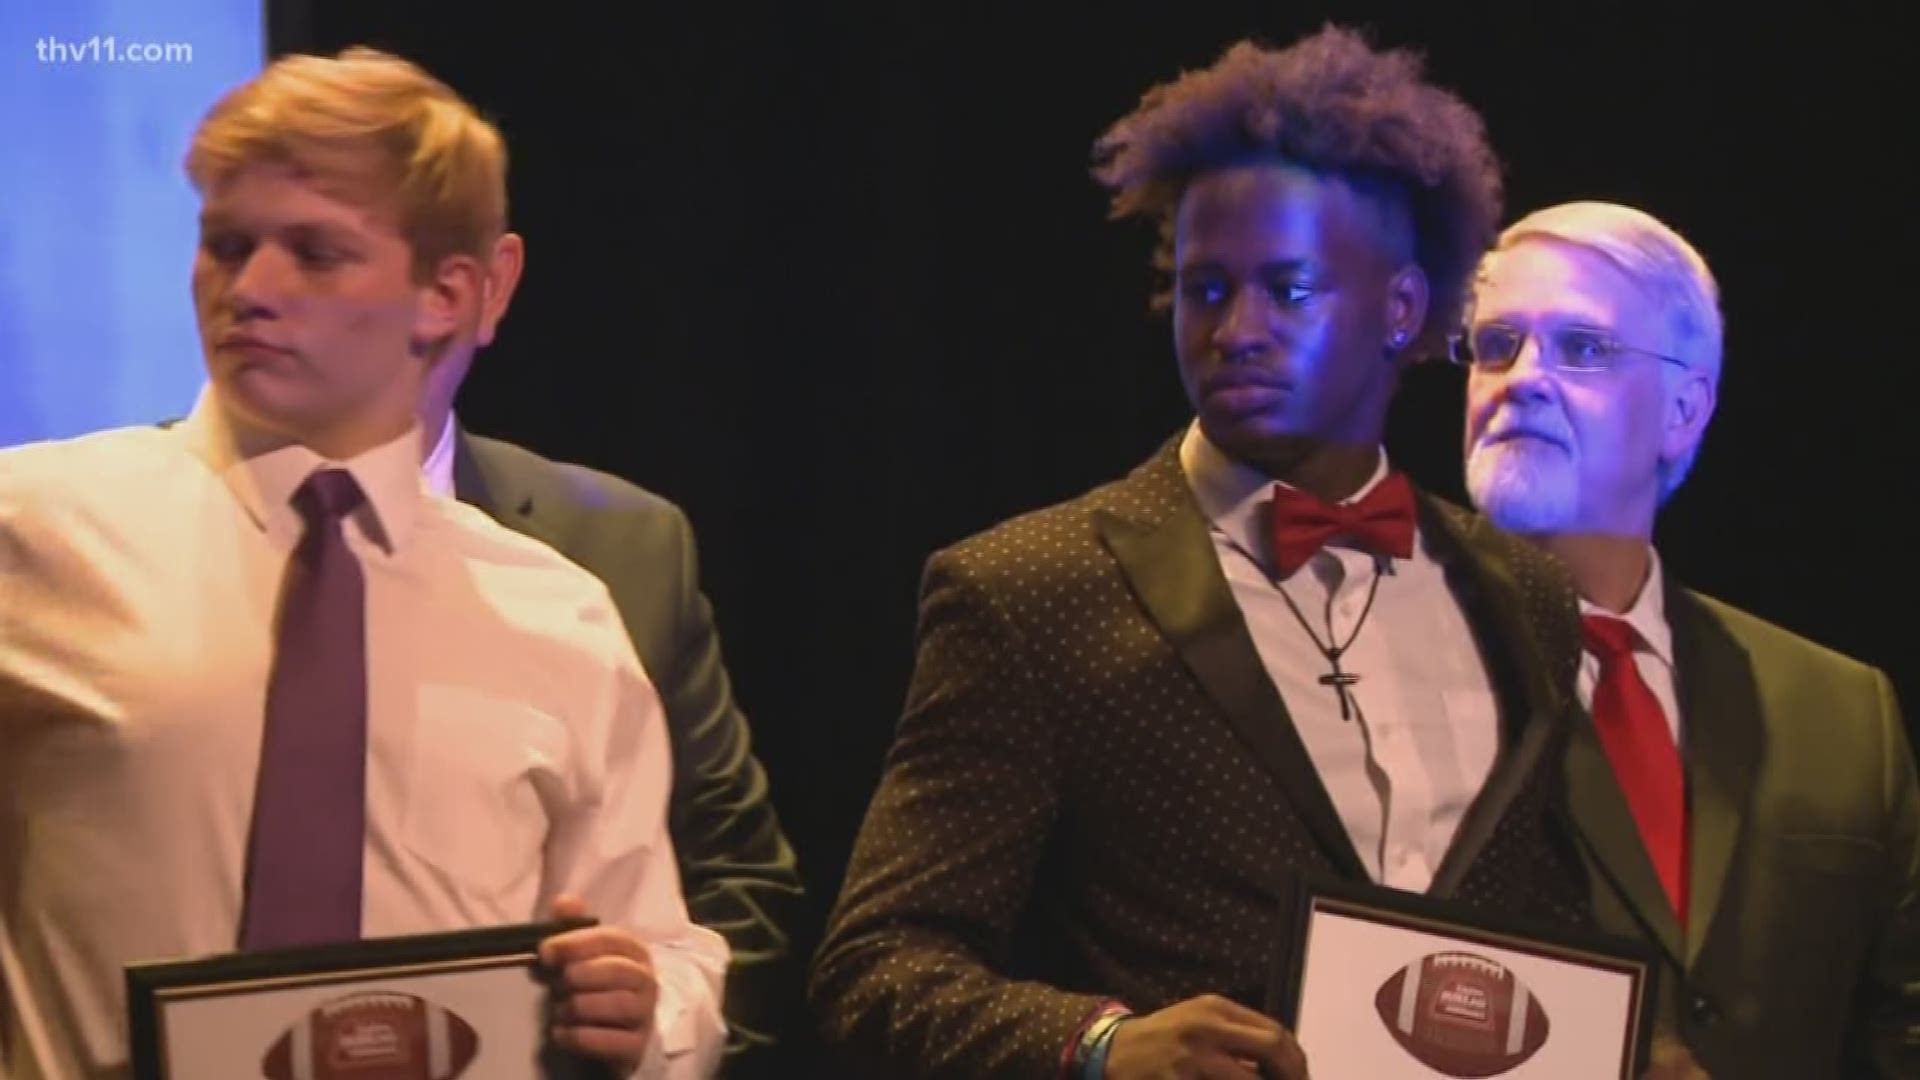 The awards handed out Monday night recognize Arkansas' top offensive player, defensive player, and coach in every classification.